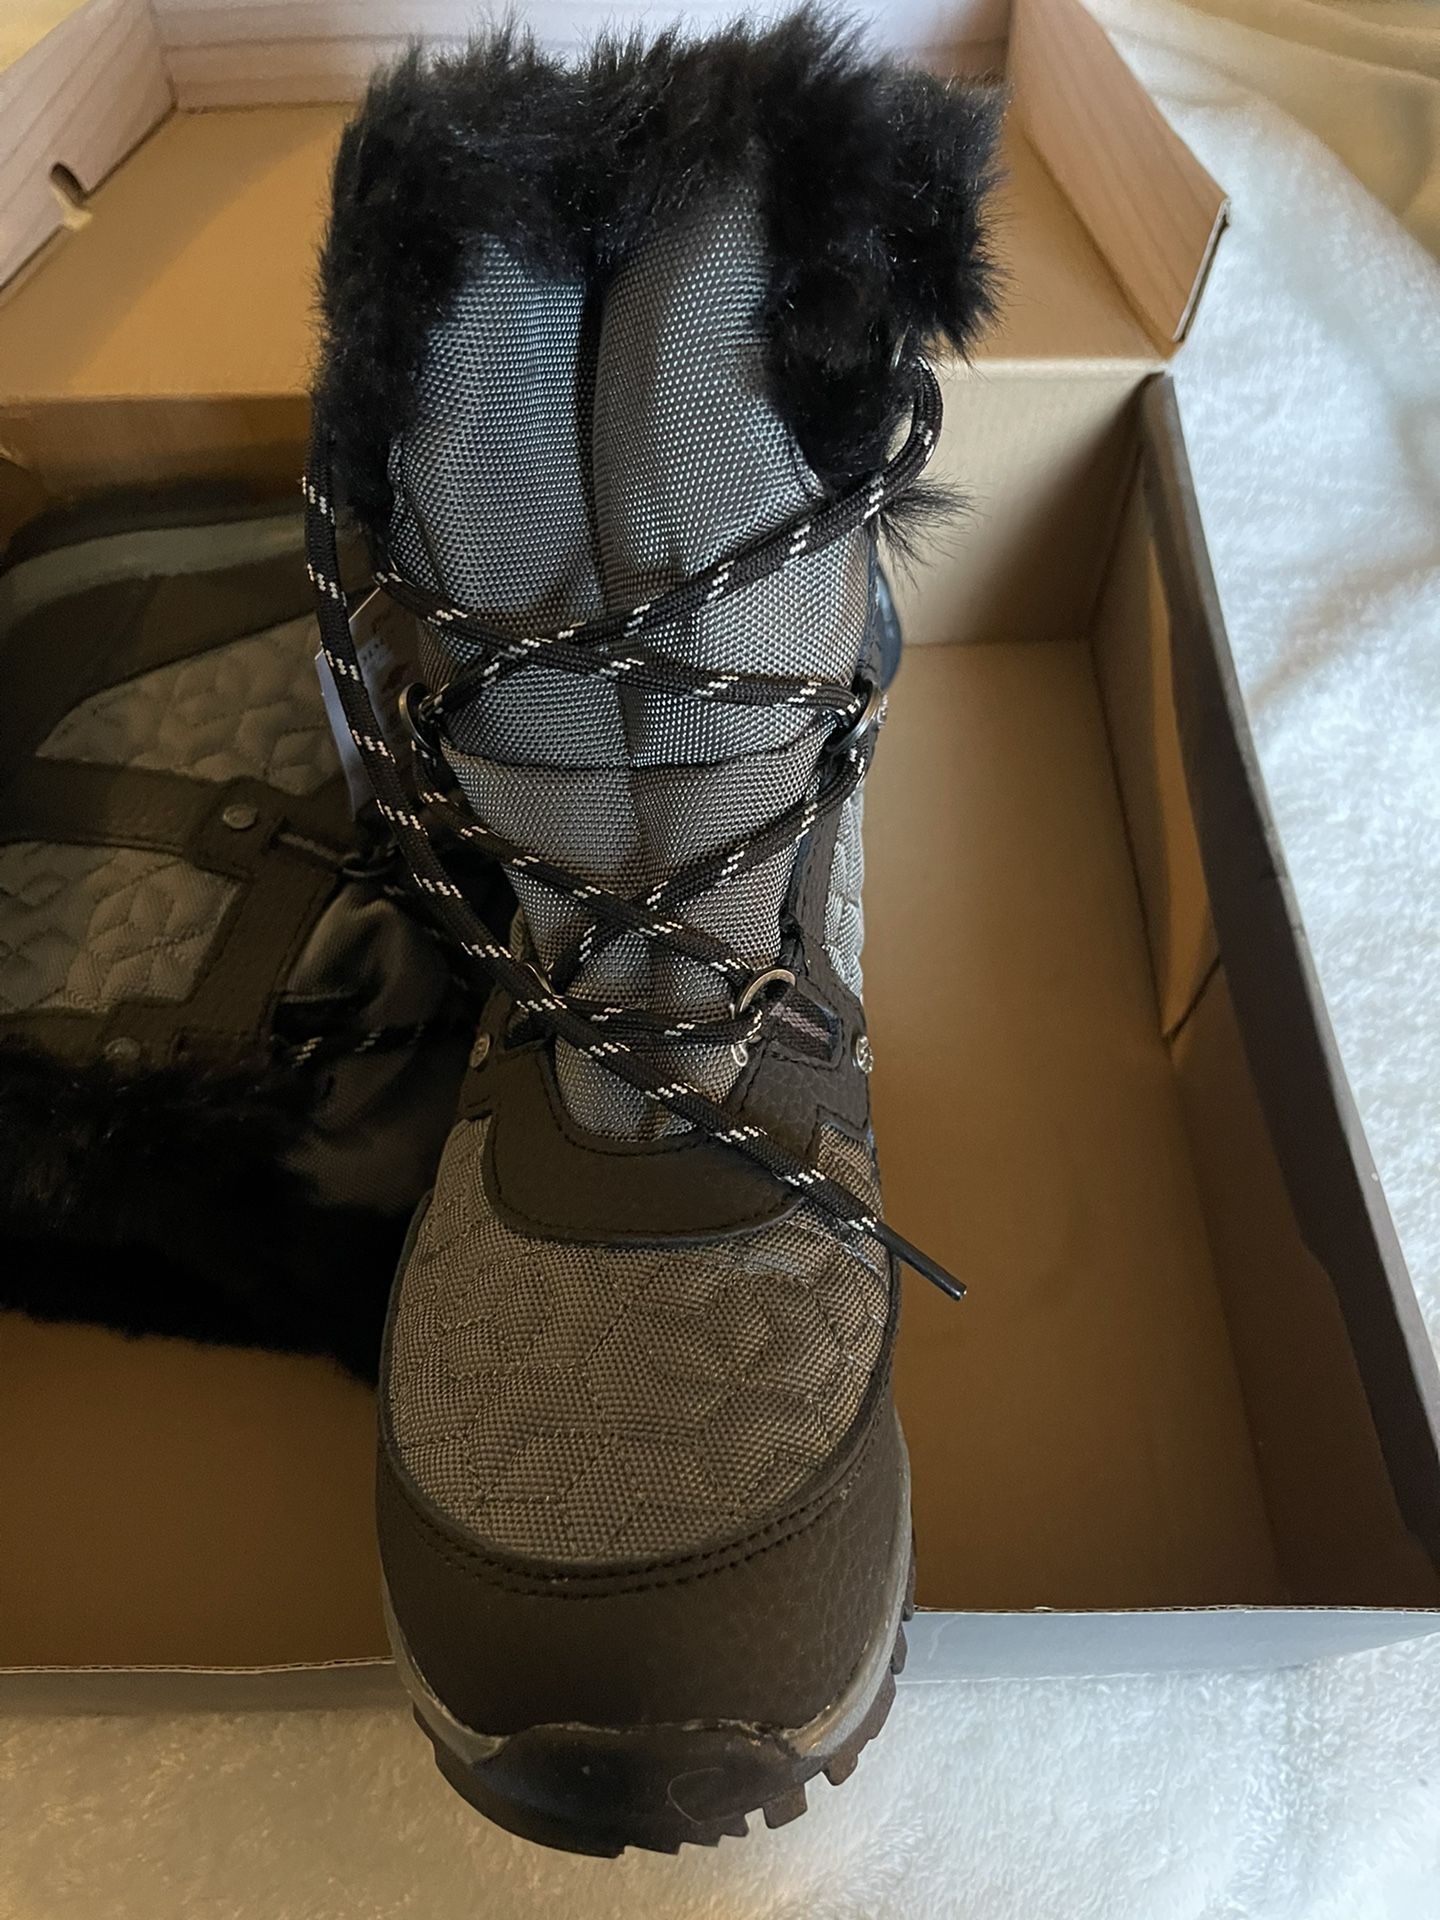 Bear Paw Boots, New 